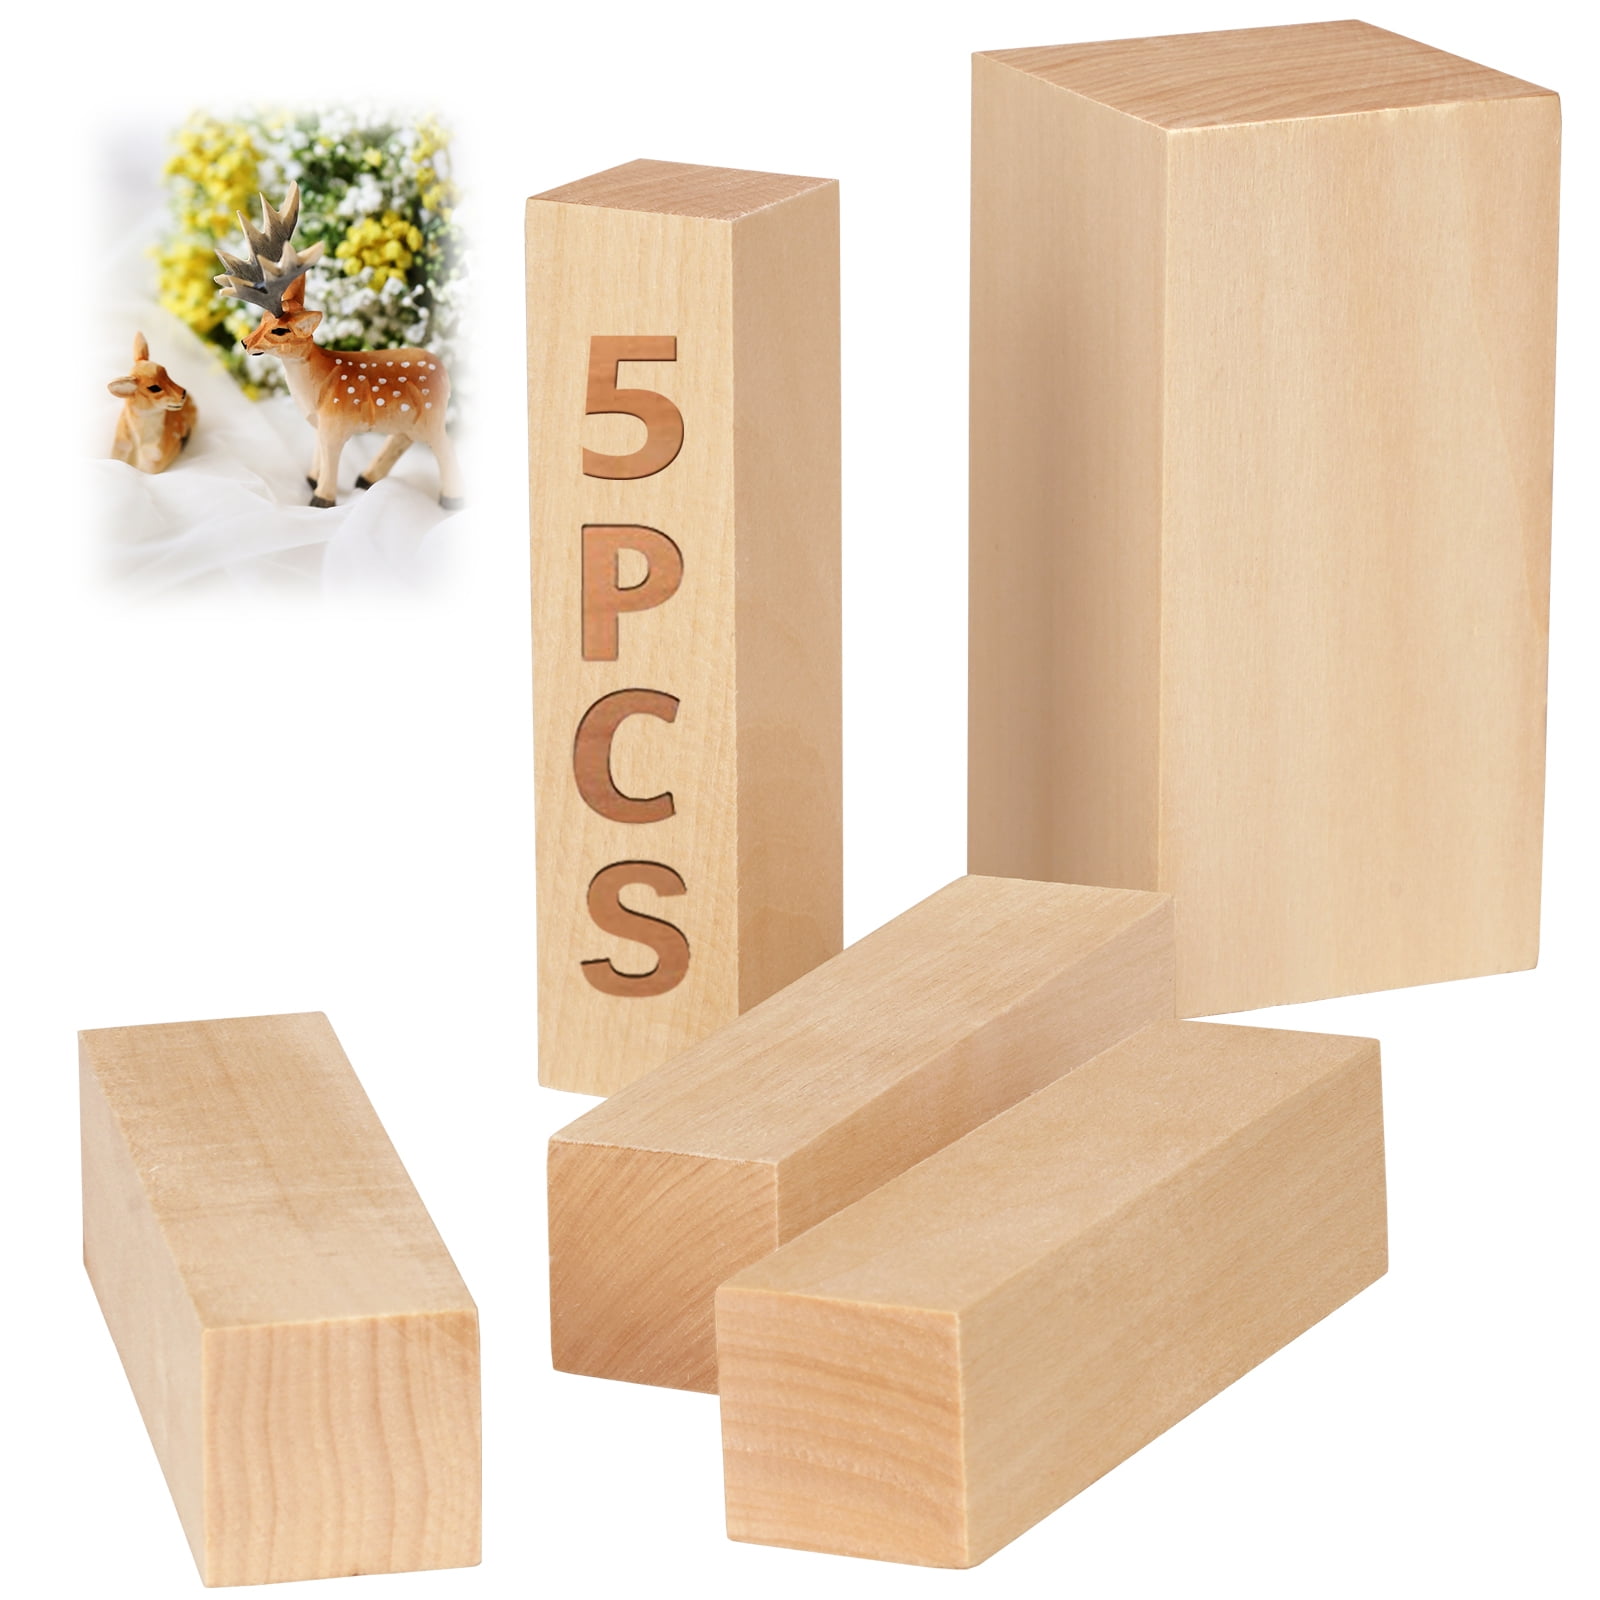 cubes Unfinished Wood Blocks for wood crafts Four 4 4 cm pieces 1 1/2 inch 